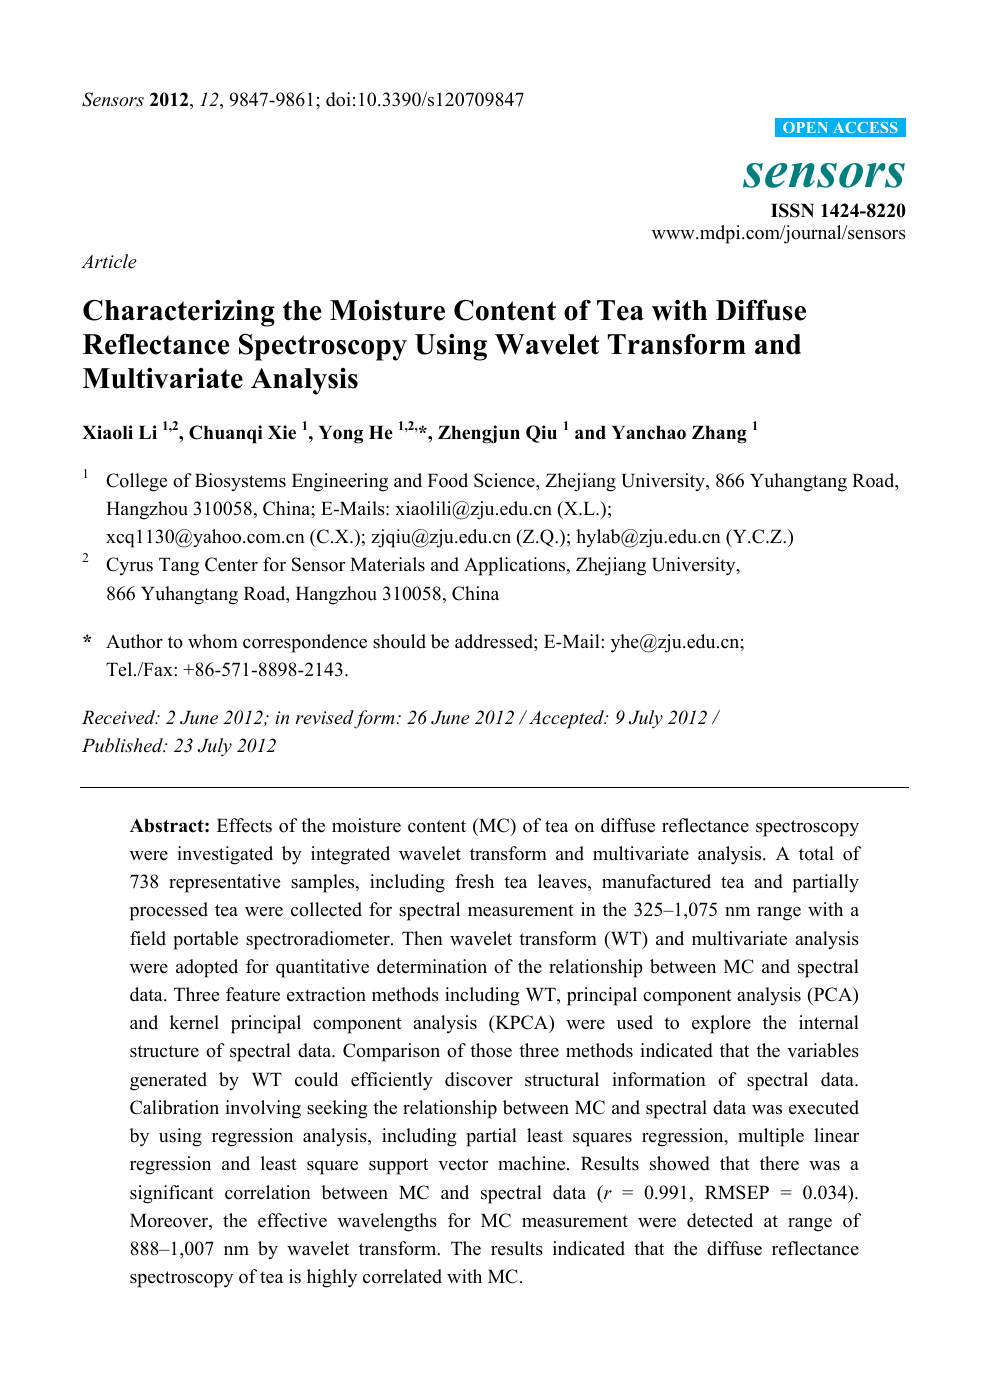 Characterizing The Moisture Content Of Tea With Diffuse Reflectance Spectroscopy Using Wavelet Transform And Multivariate Analysis Topic Of Research Paper In Earth And Related Environmental Sciences Download Scholarly Article Pdf And